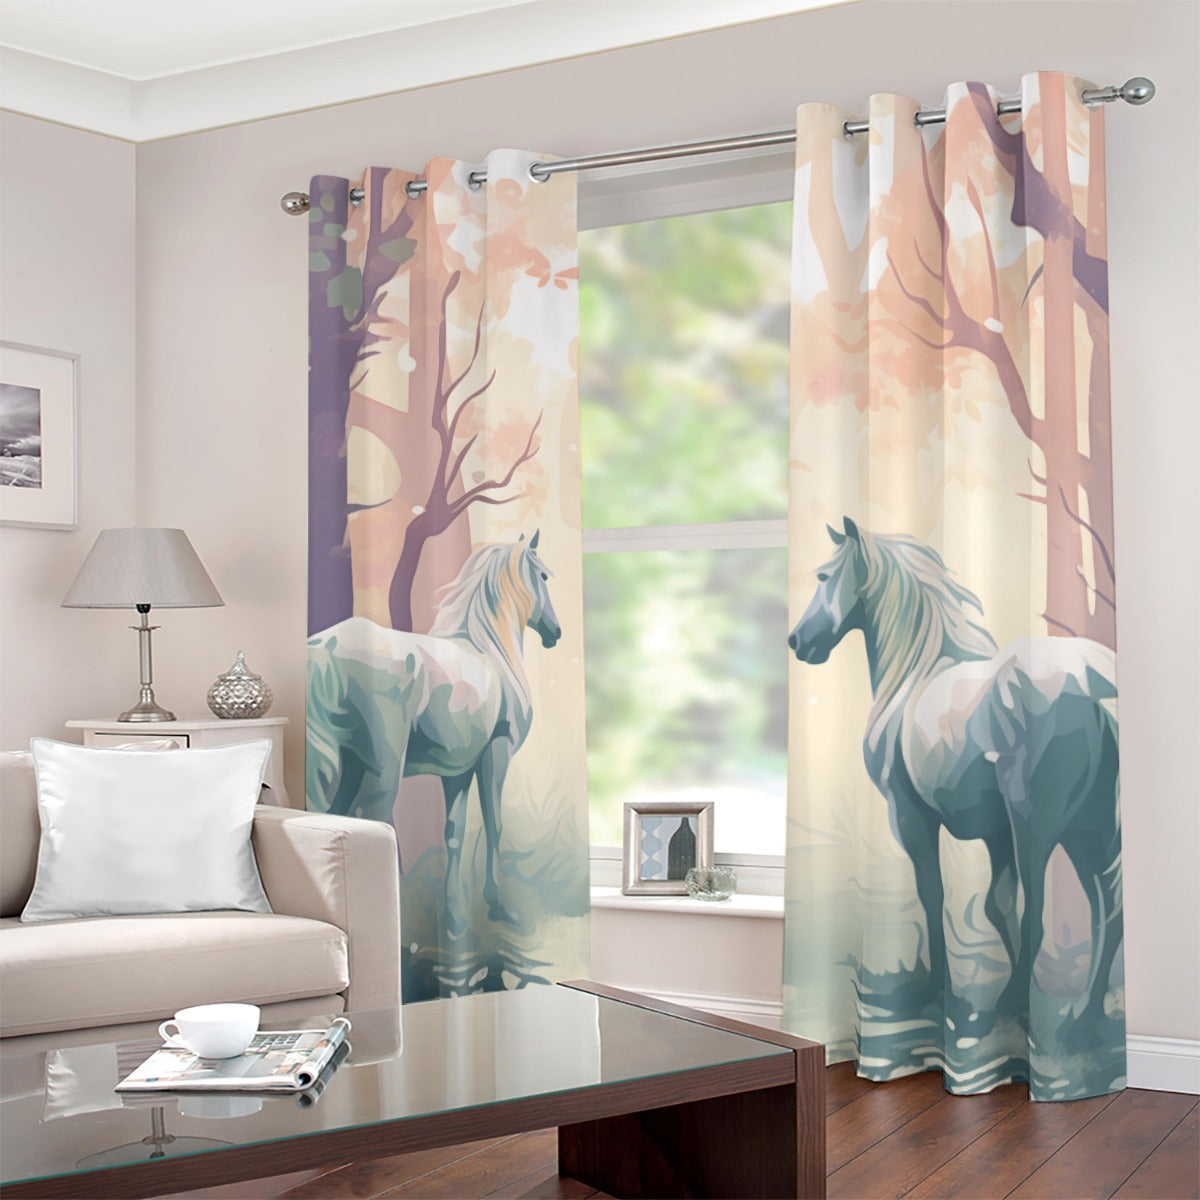 Blackout Curtain - Pastel Fall